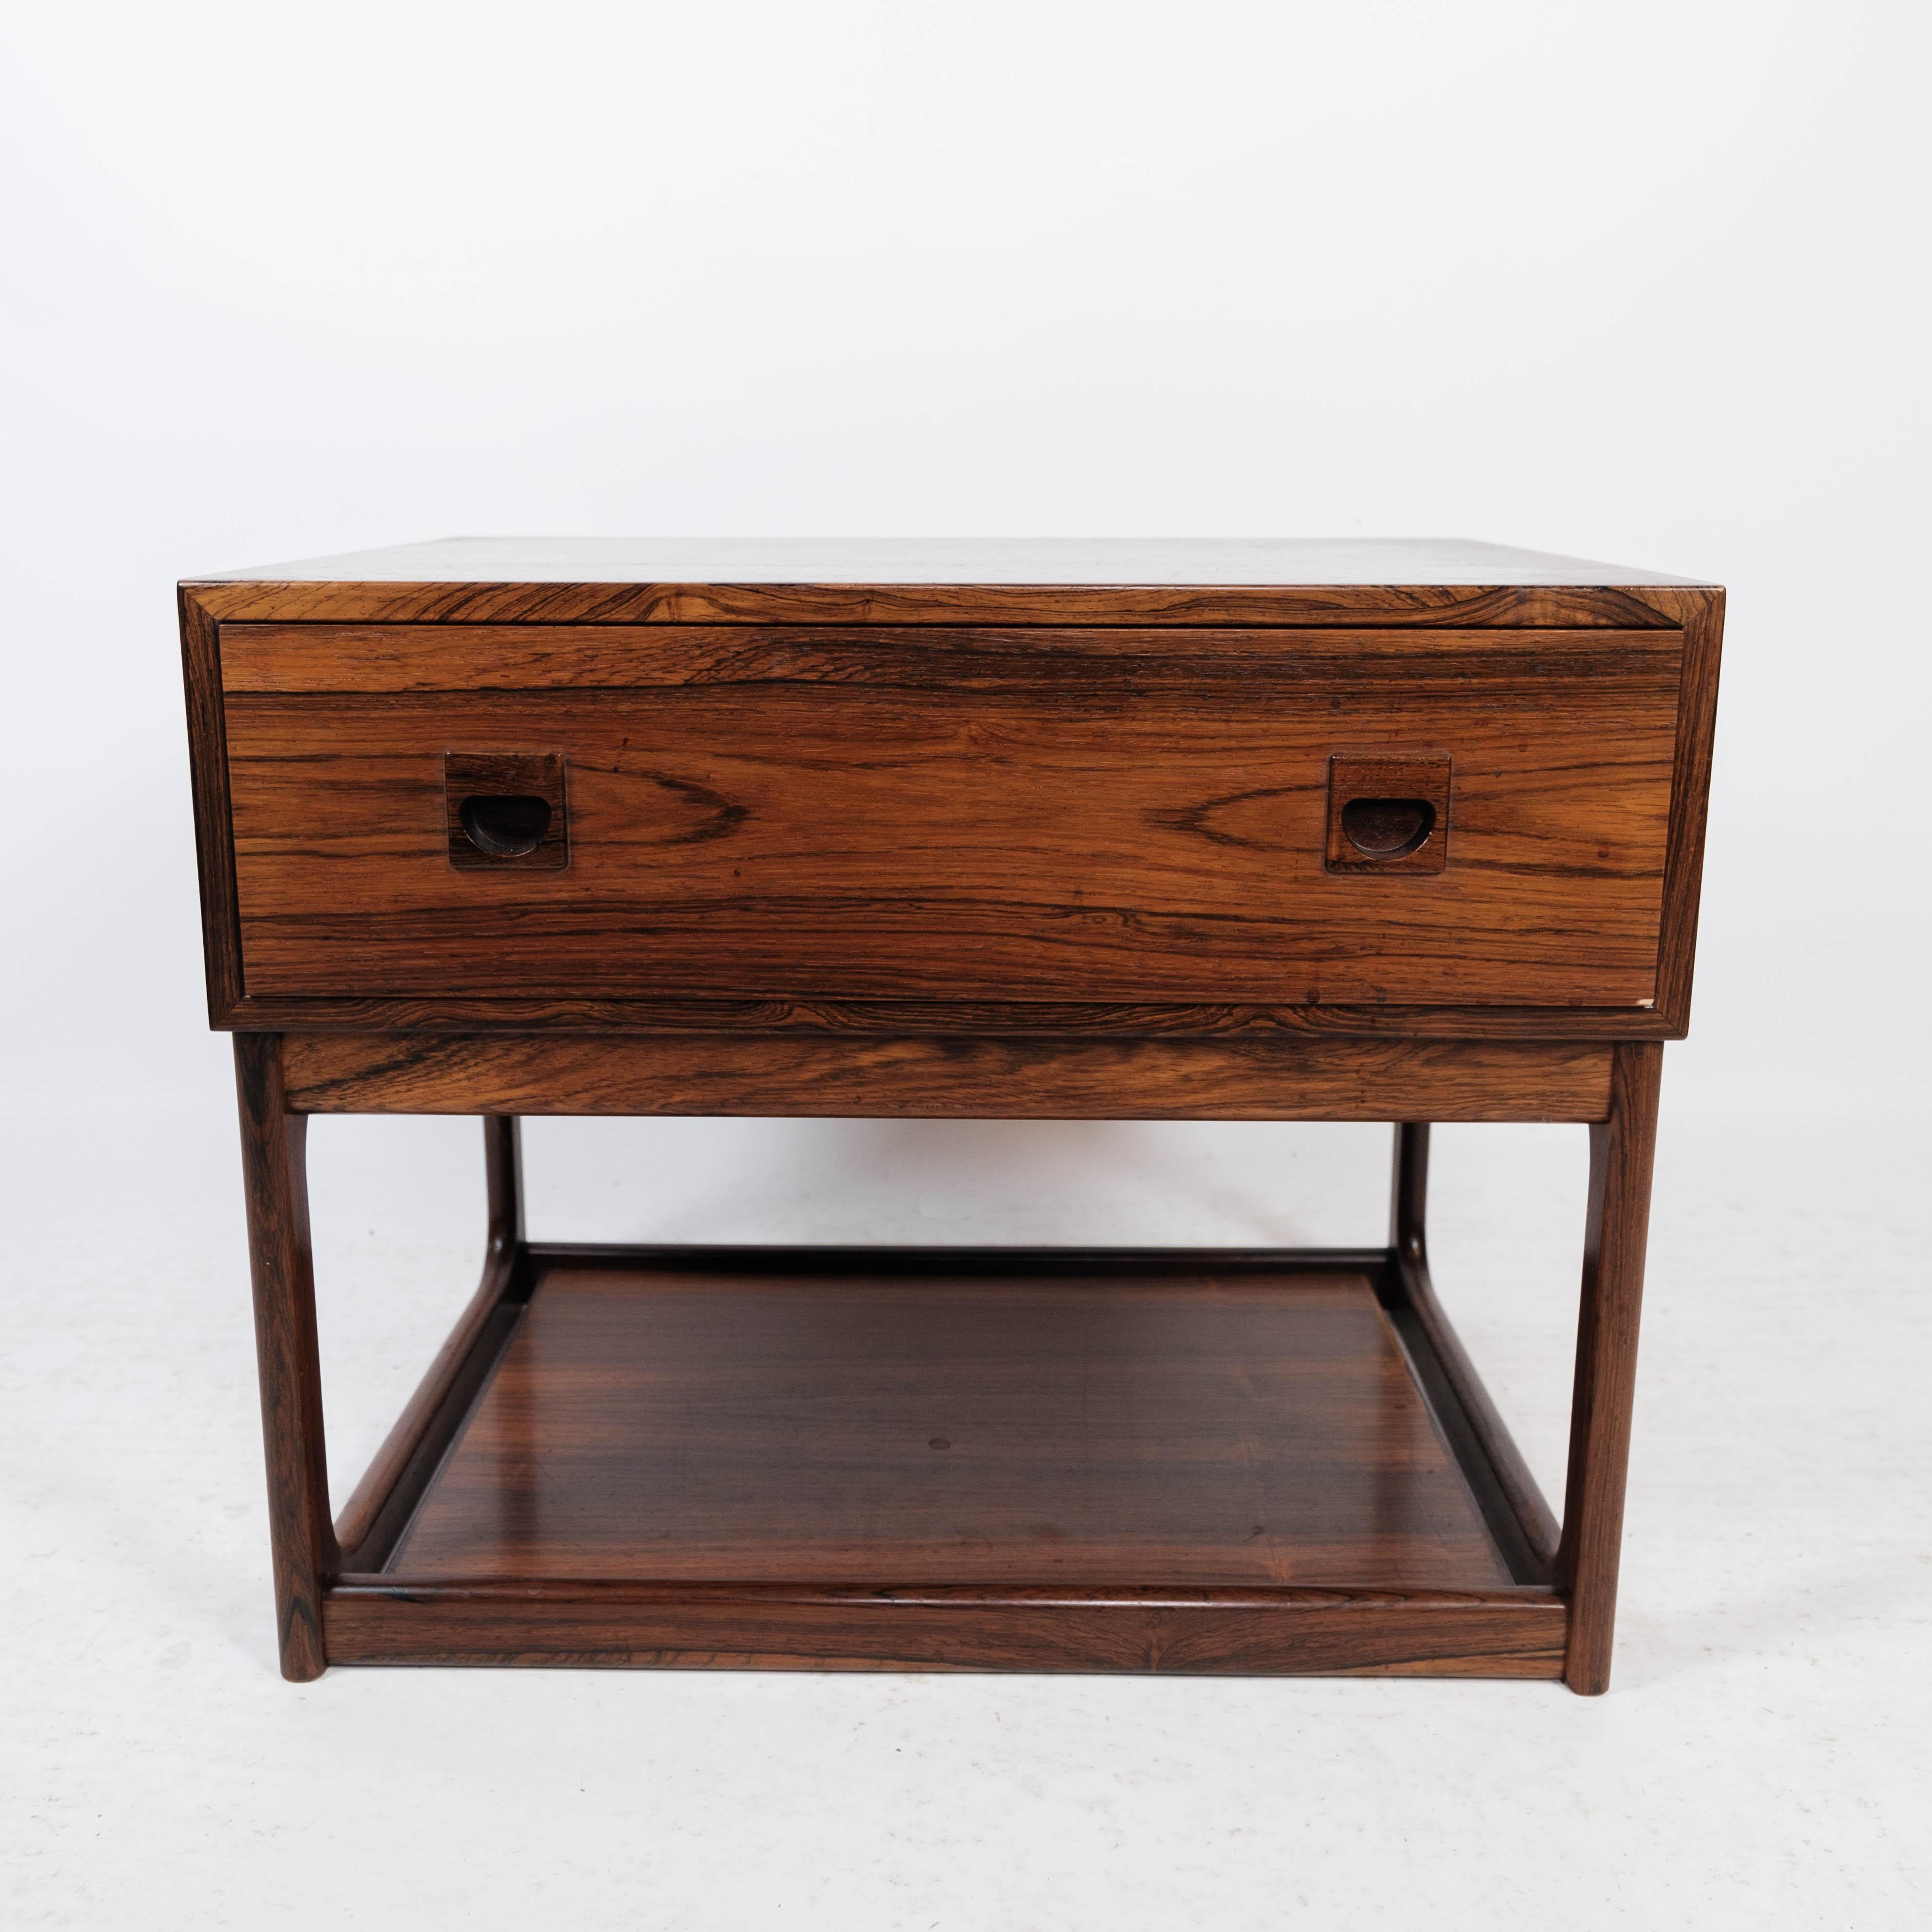 Bedside table in rosewood of Danish design manufactured by Brouer in the 1960s. The table is in great vintage condition.